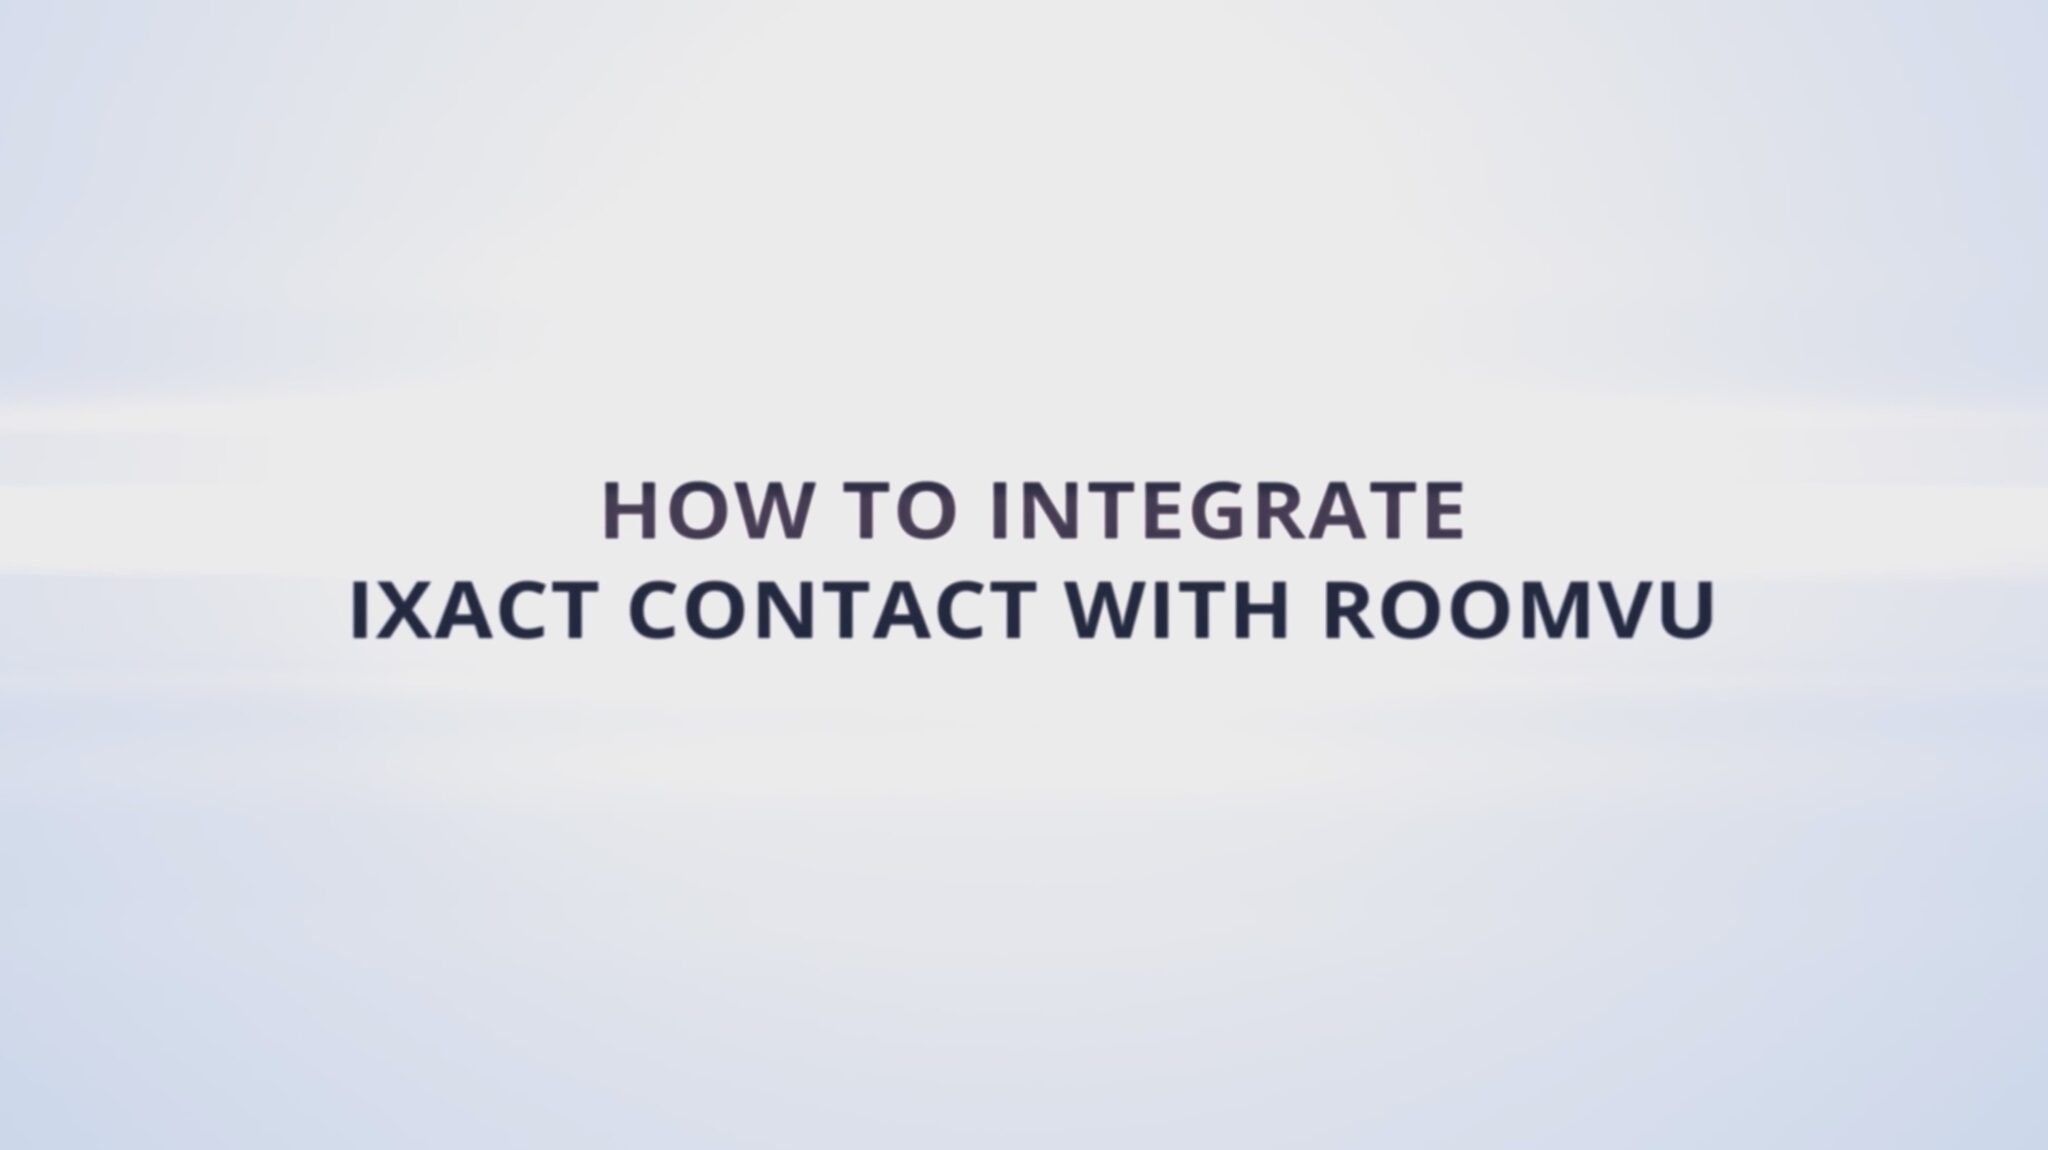 How to integrate IXACT Contact with roomvu